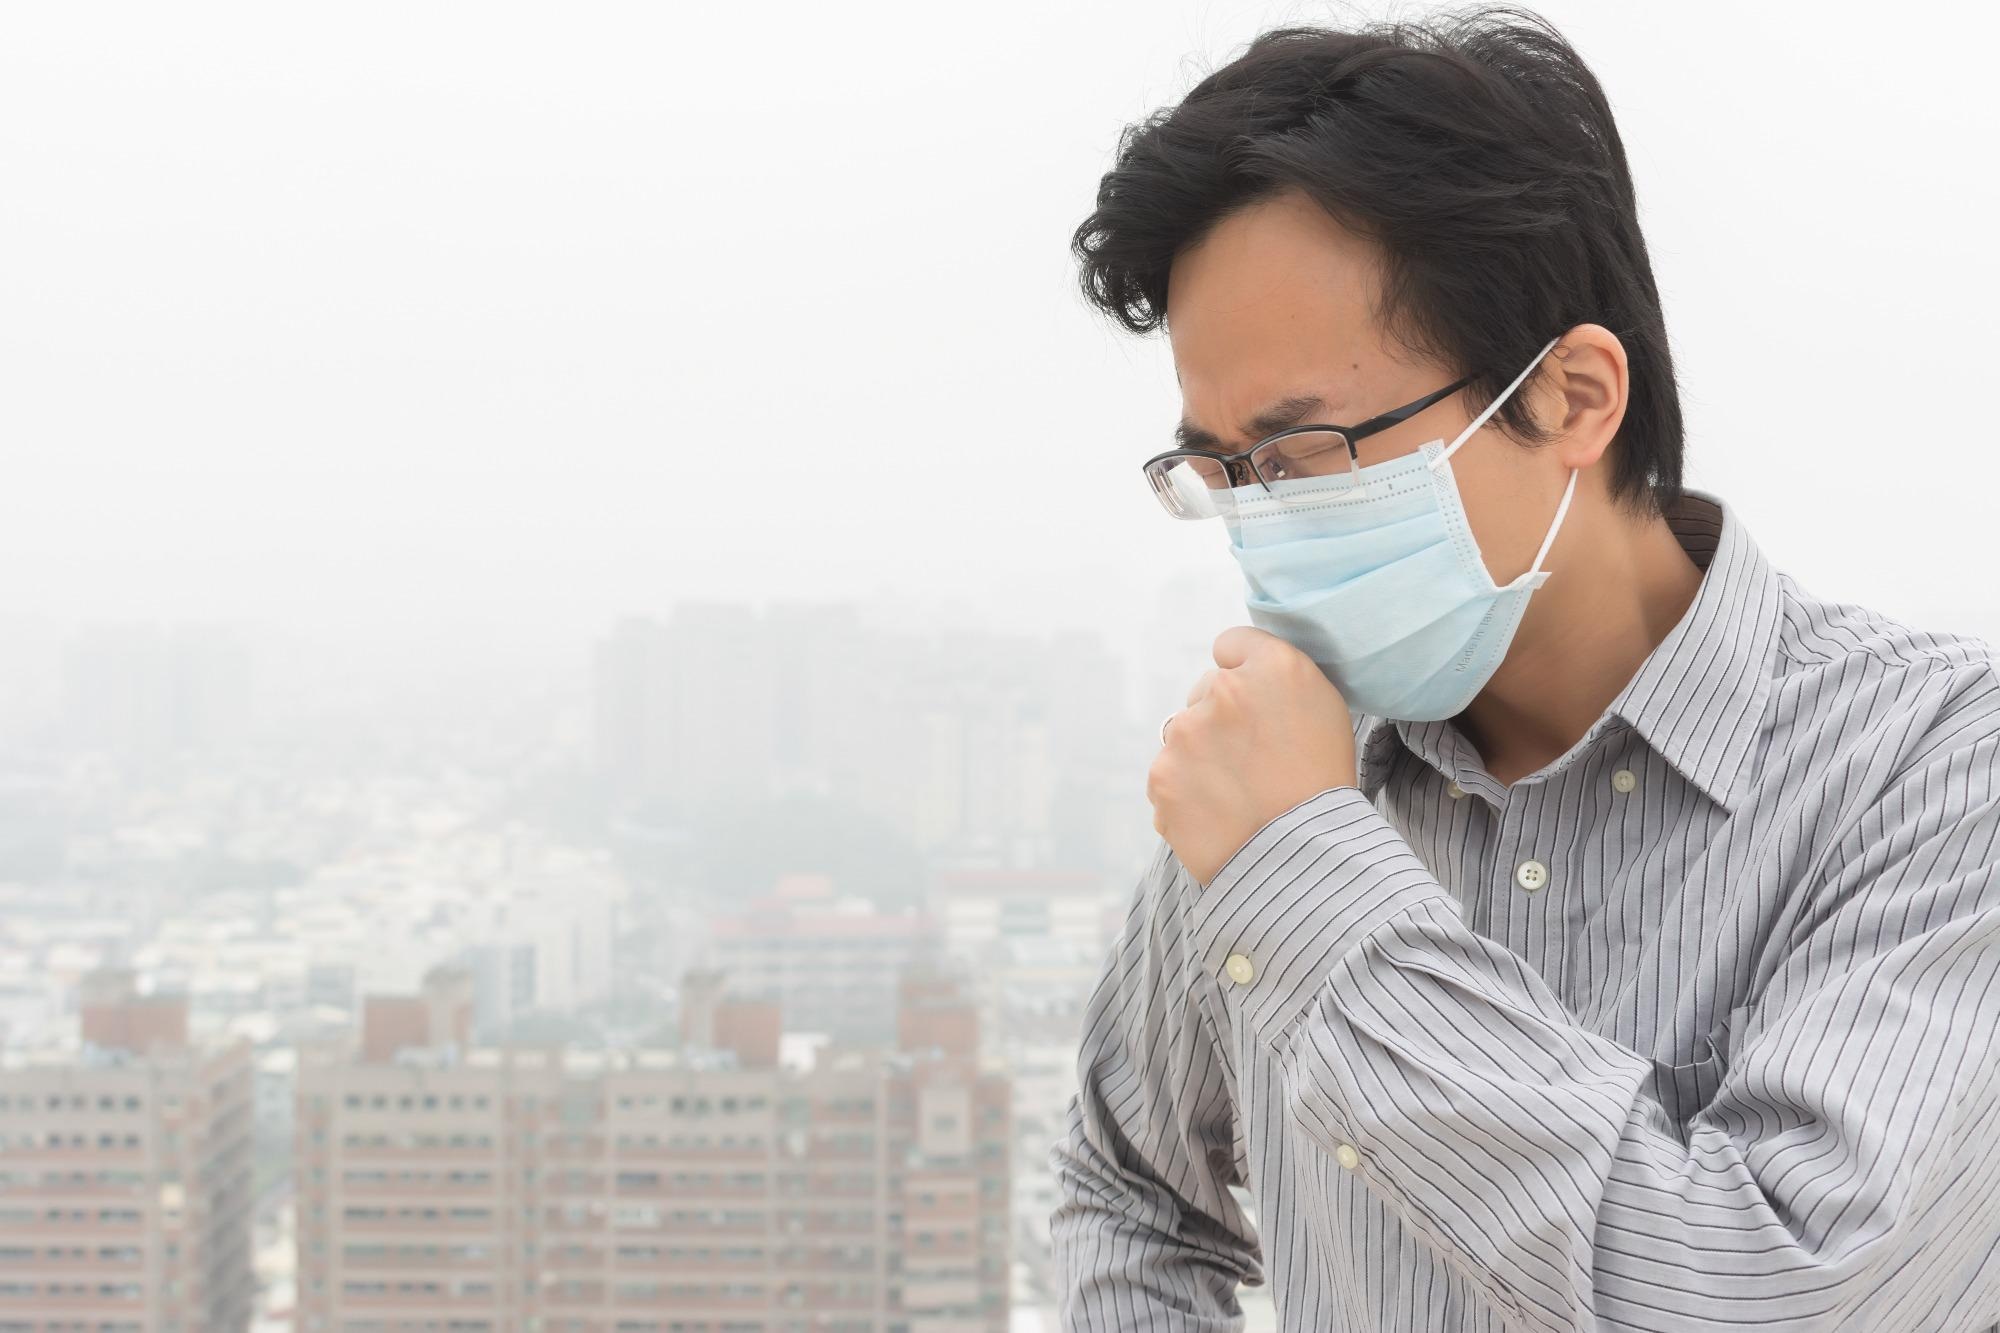 Study: Association of Short-term Air Pollution Exposure With SARS-CoV-2 Infection Among Young Adults in Sweden. Image Credit: Elwyn / Shutterstock